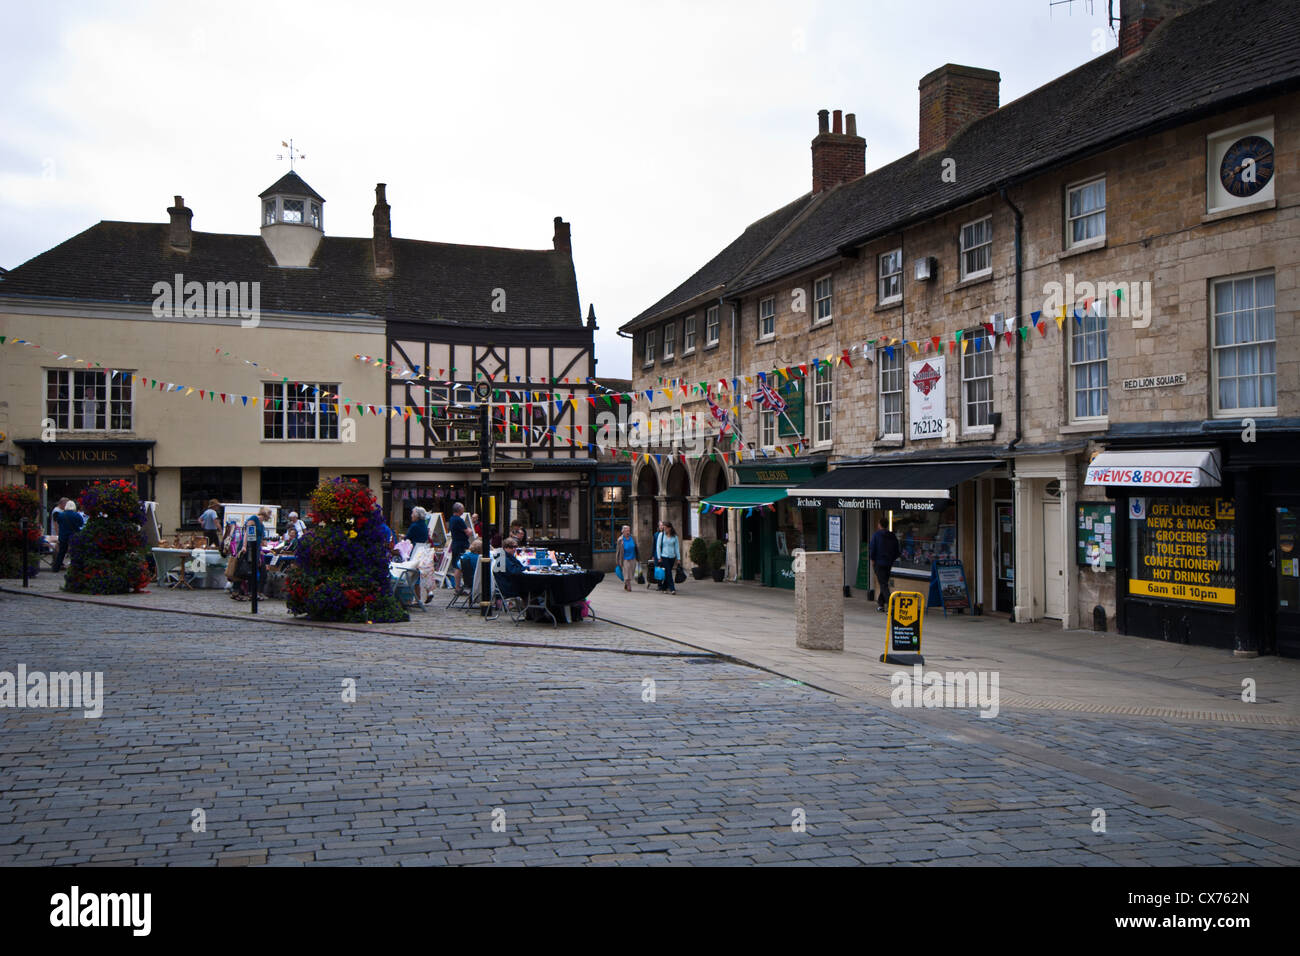 Marché artisanal, Red Lion Square, Stamford, Lincolnshire, Angleterre, Royaume-Uni. Banque D'Images